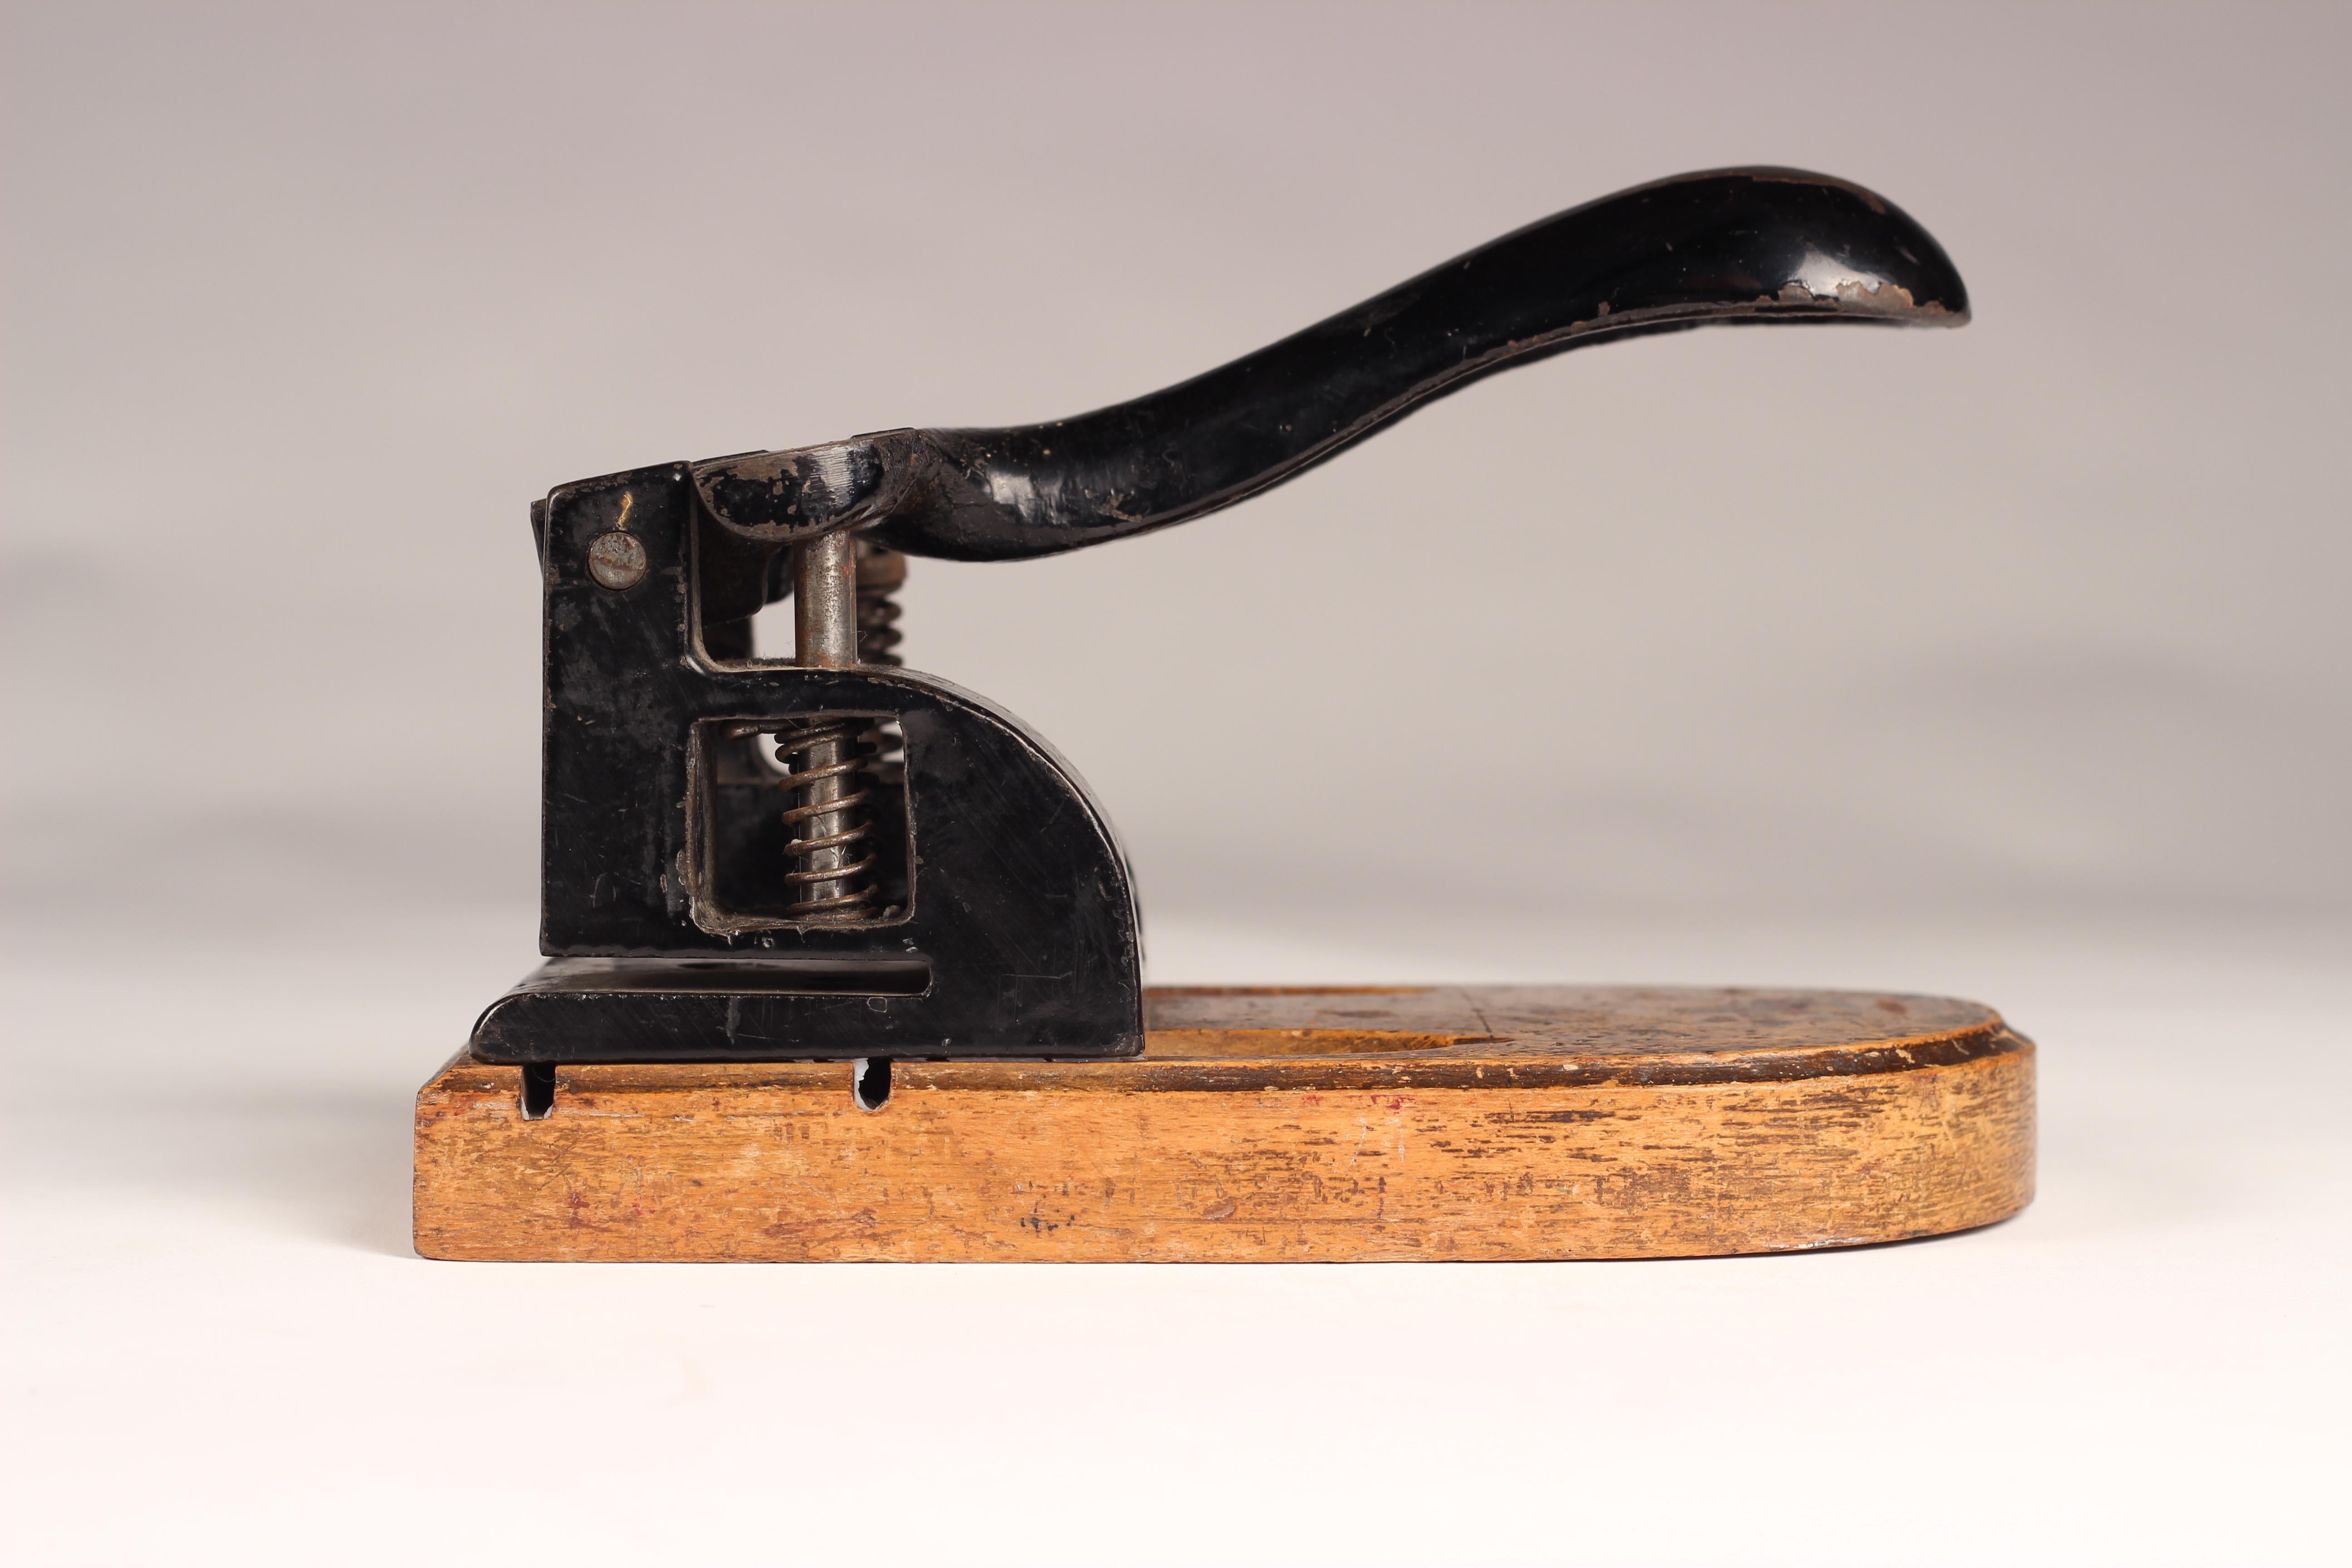 A vintage heavy duty metal, fully functioning hole punch mounted on oak base found in the Lake District in the North of England.